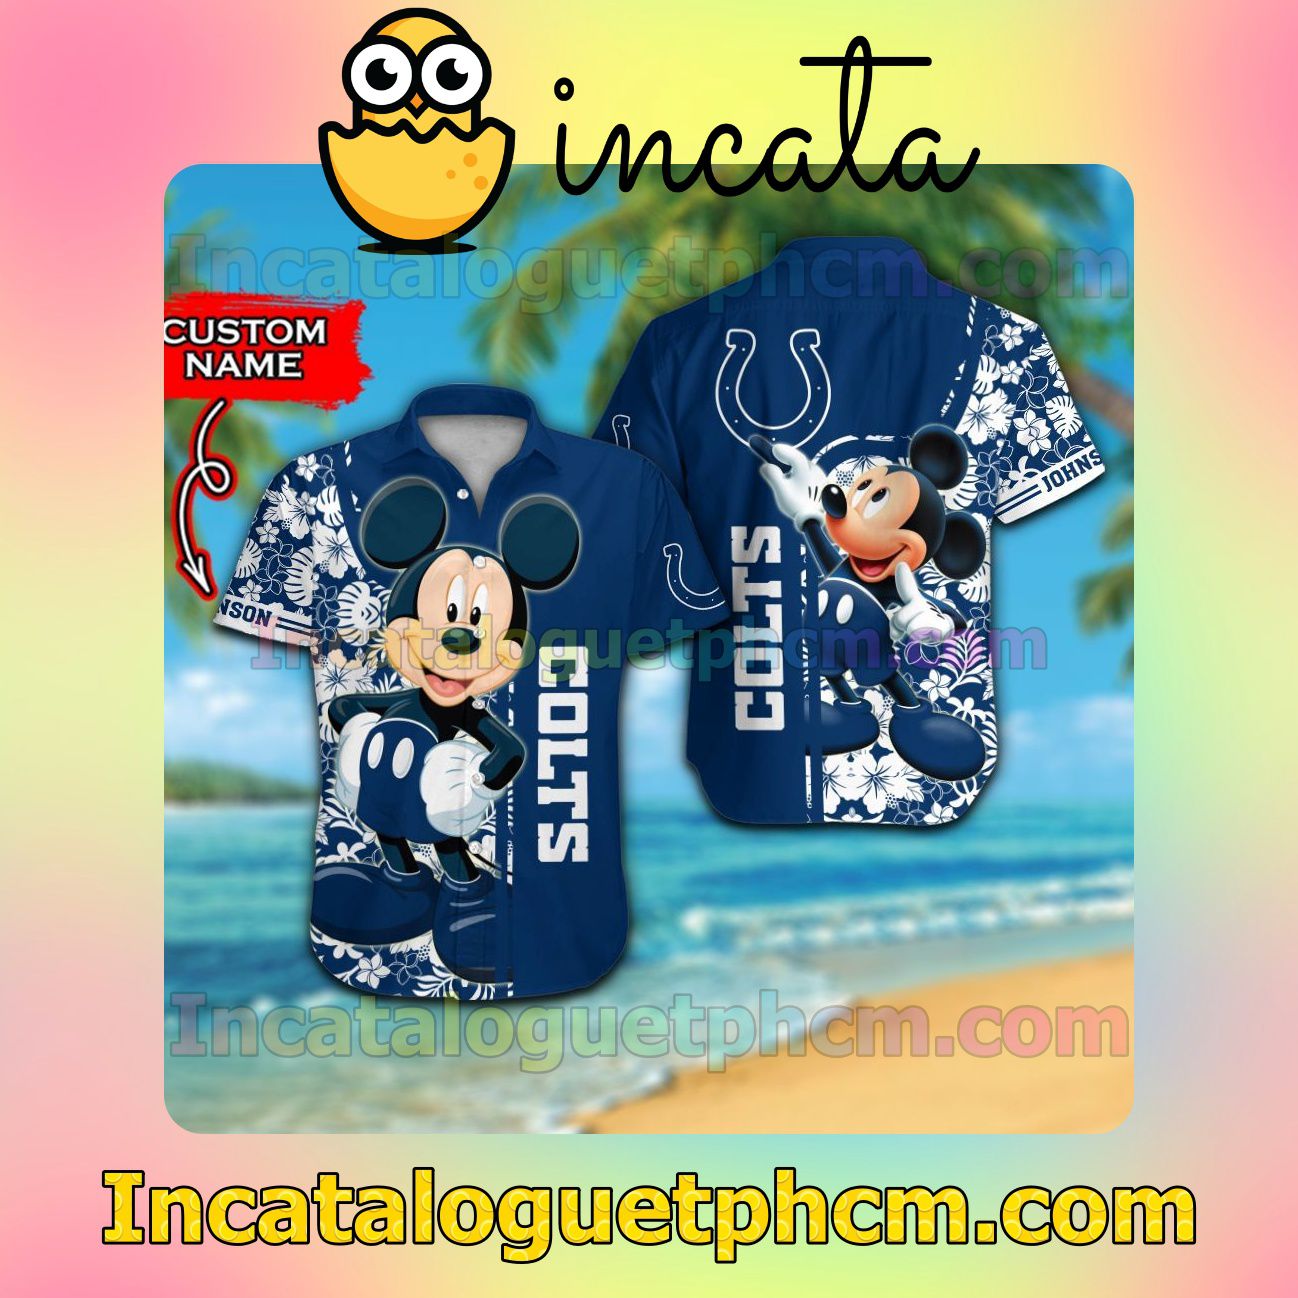 Personalized Indianapolis Colts & Mickey Mouse Beach Vacation Shirt, Swim Shorts